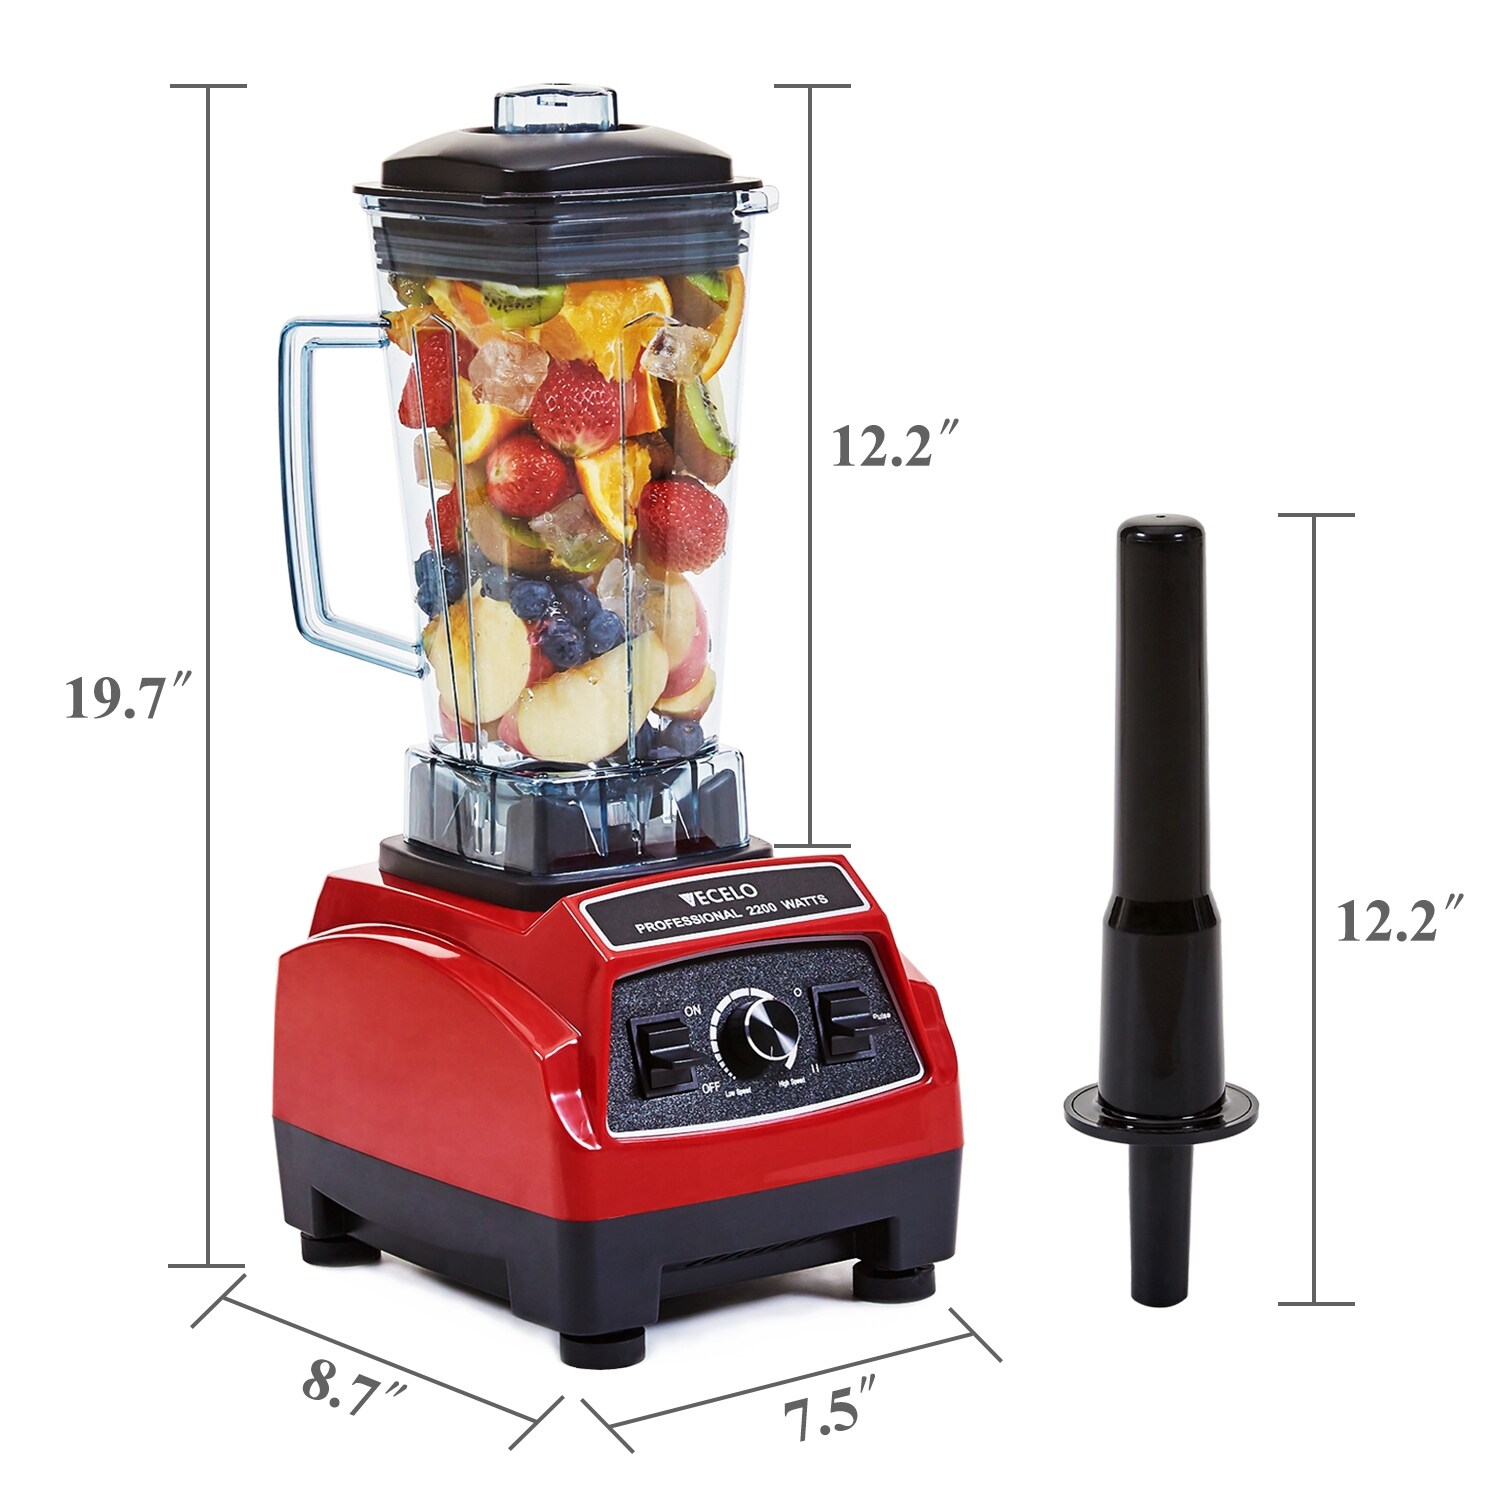 https://ak1.ostkcdn.com/images/products/is/images/direct/ed4a95a61b629edf04bb58bdc104448191ff5d19/VECELO-Professional-Countertop-Blender-2200-Watt-Base-Total-Crushing-Technology-for-Smoothies%2C-Ice-and-Nut.jpg